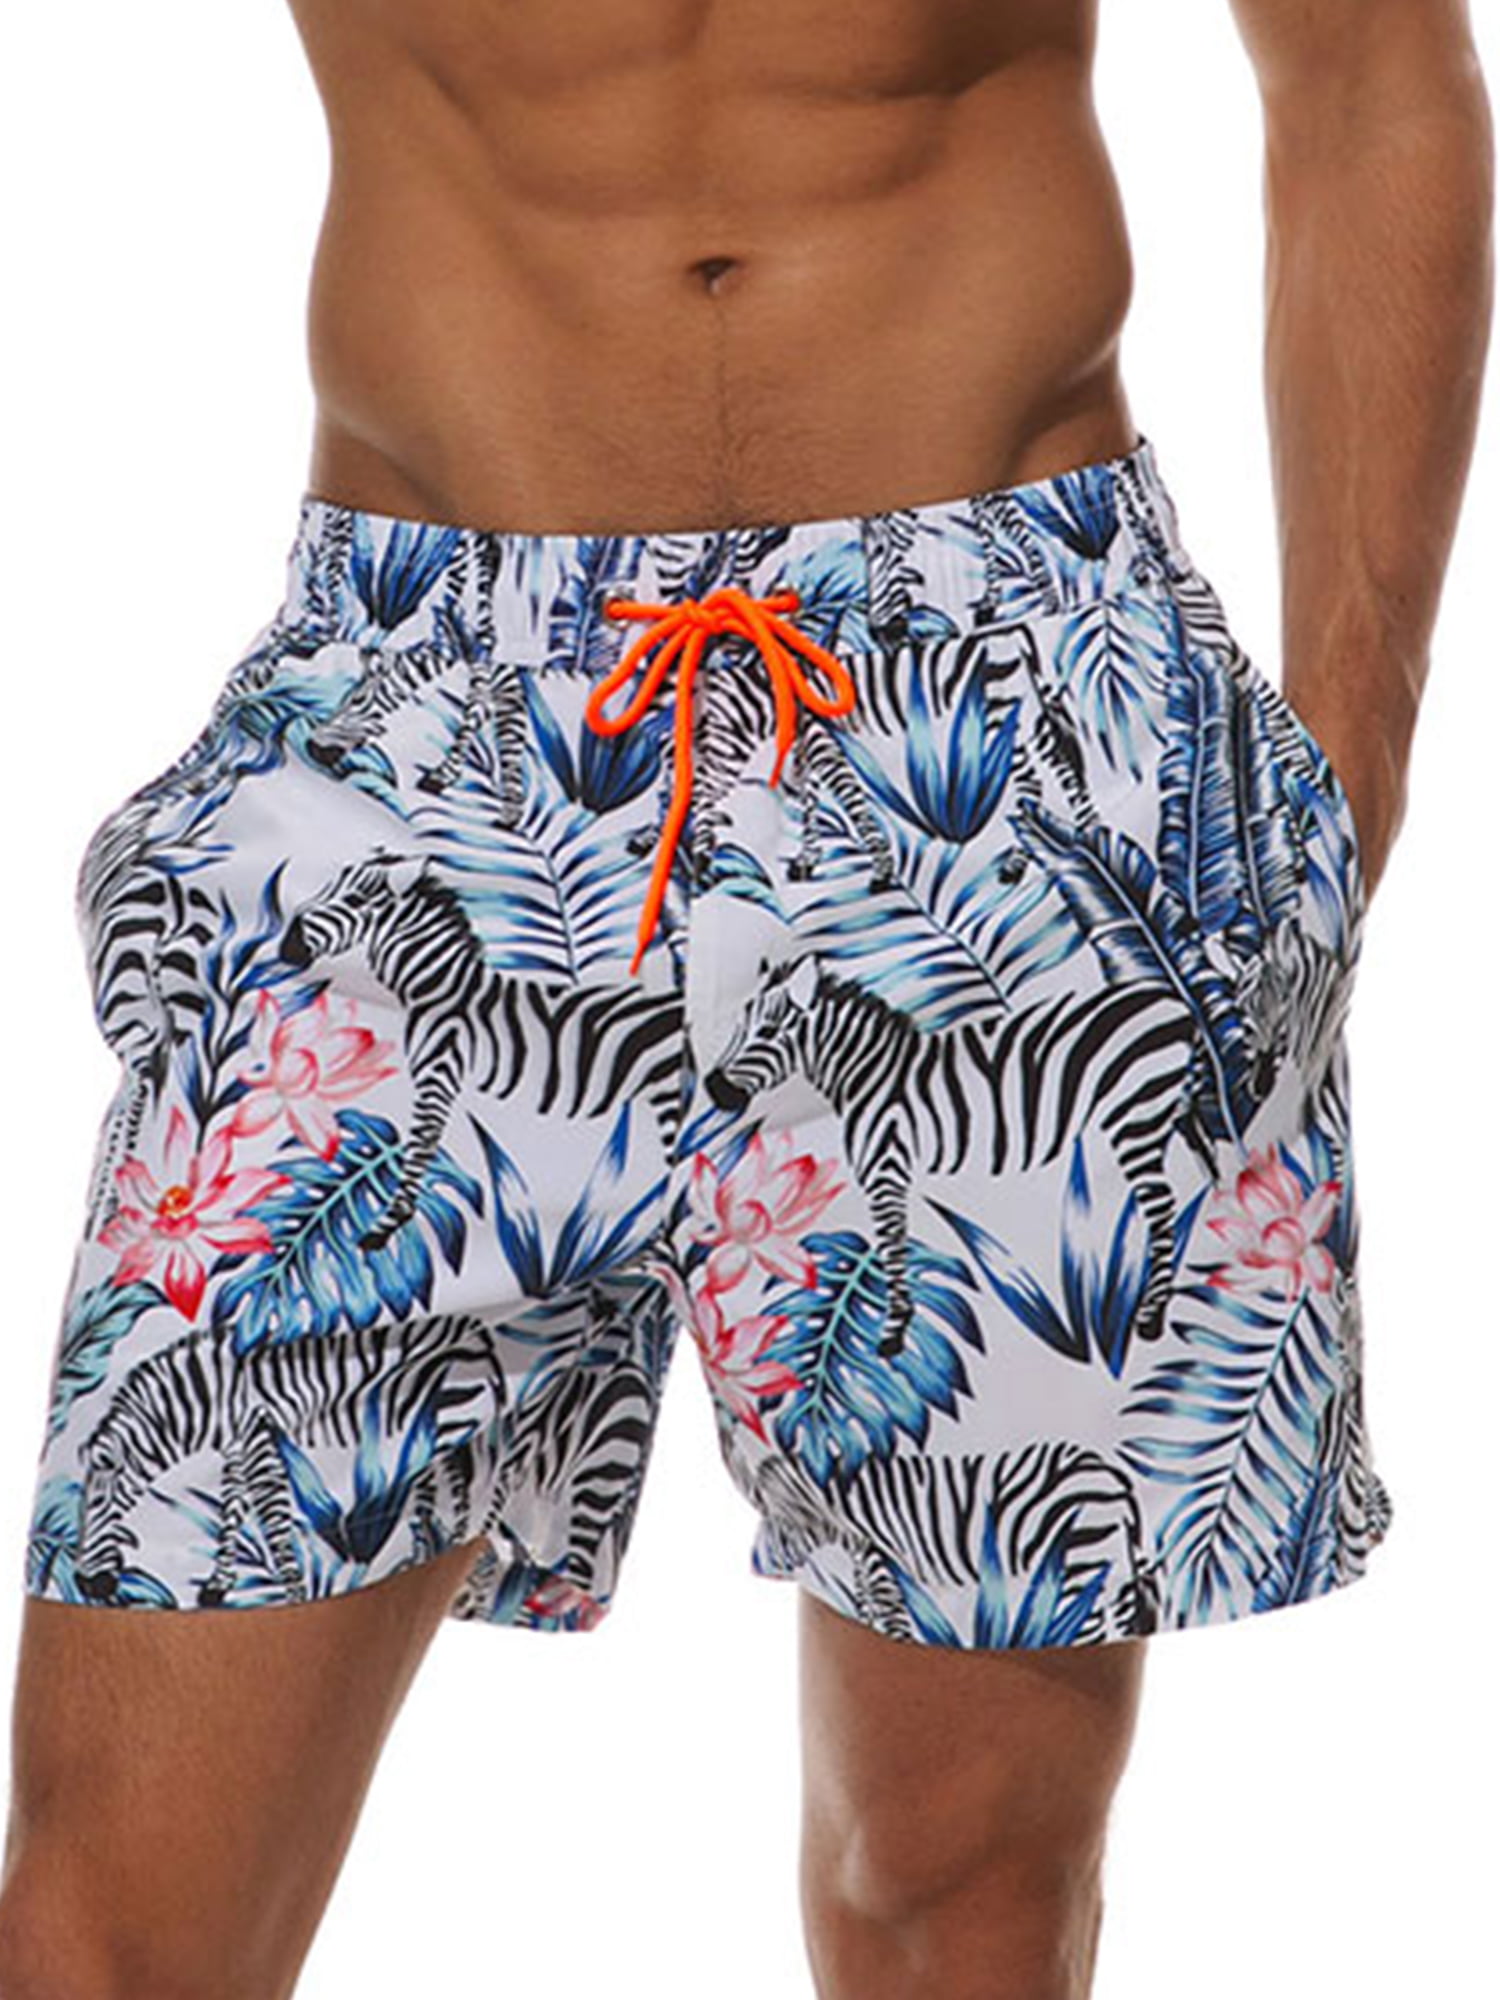 Men's Swimsuit Print Quick Dry Swimming Boxer Brief Shorts Trunks with Pouch Cup 